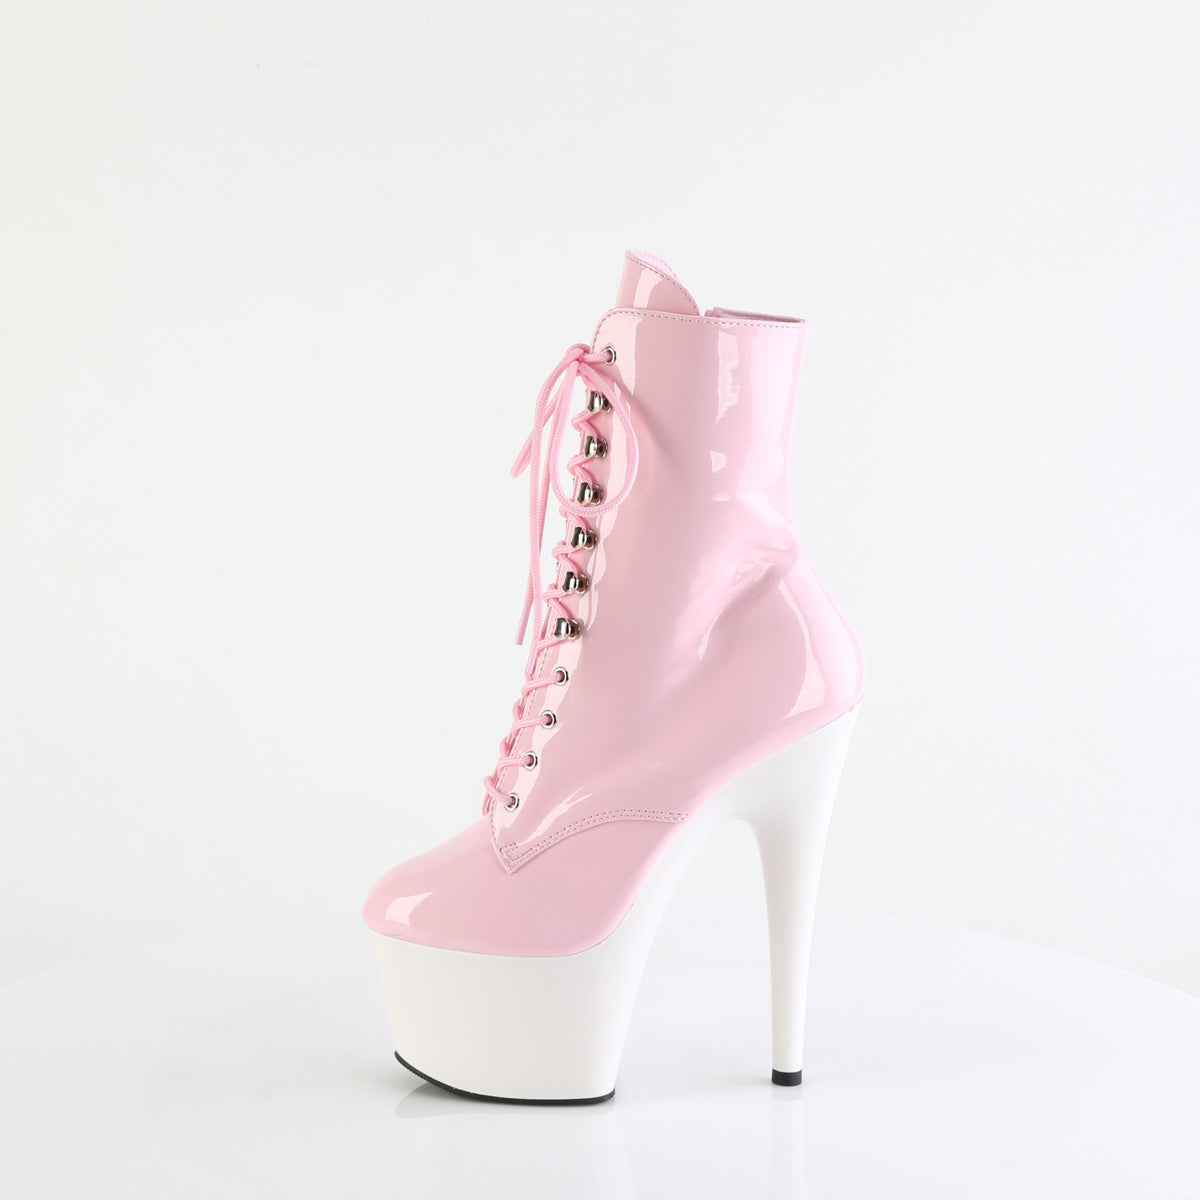 pole dancing boots pink white adore-1020